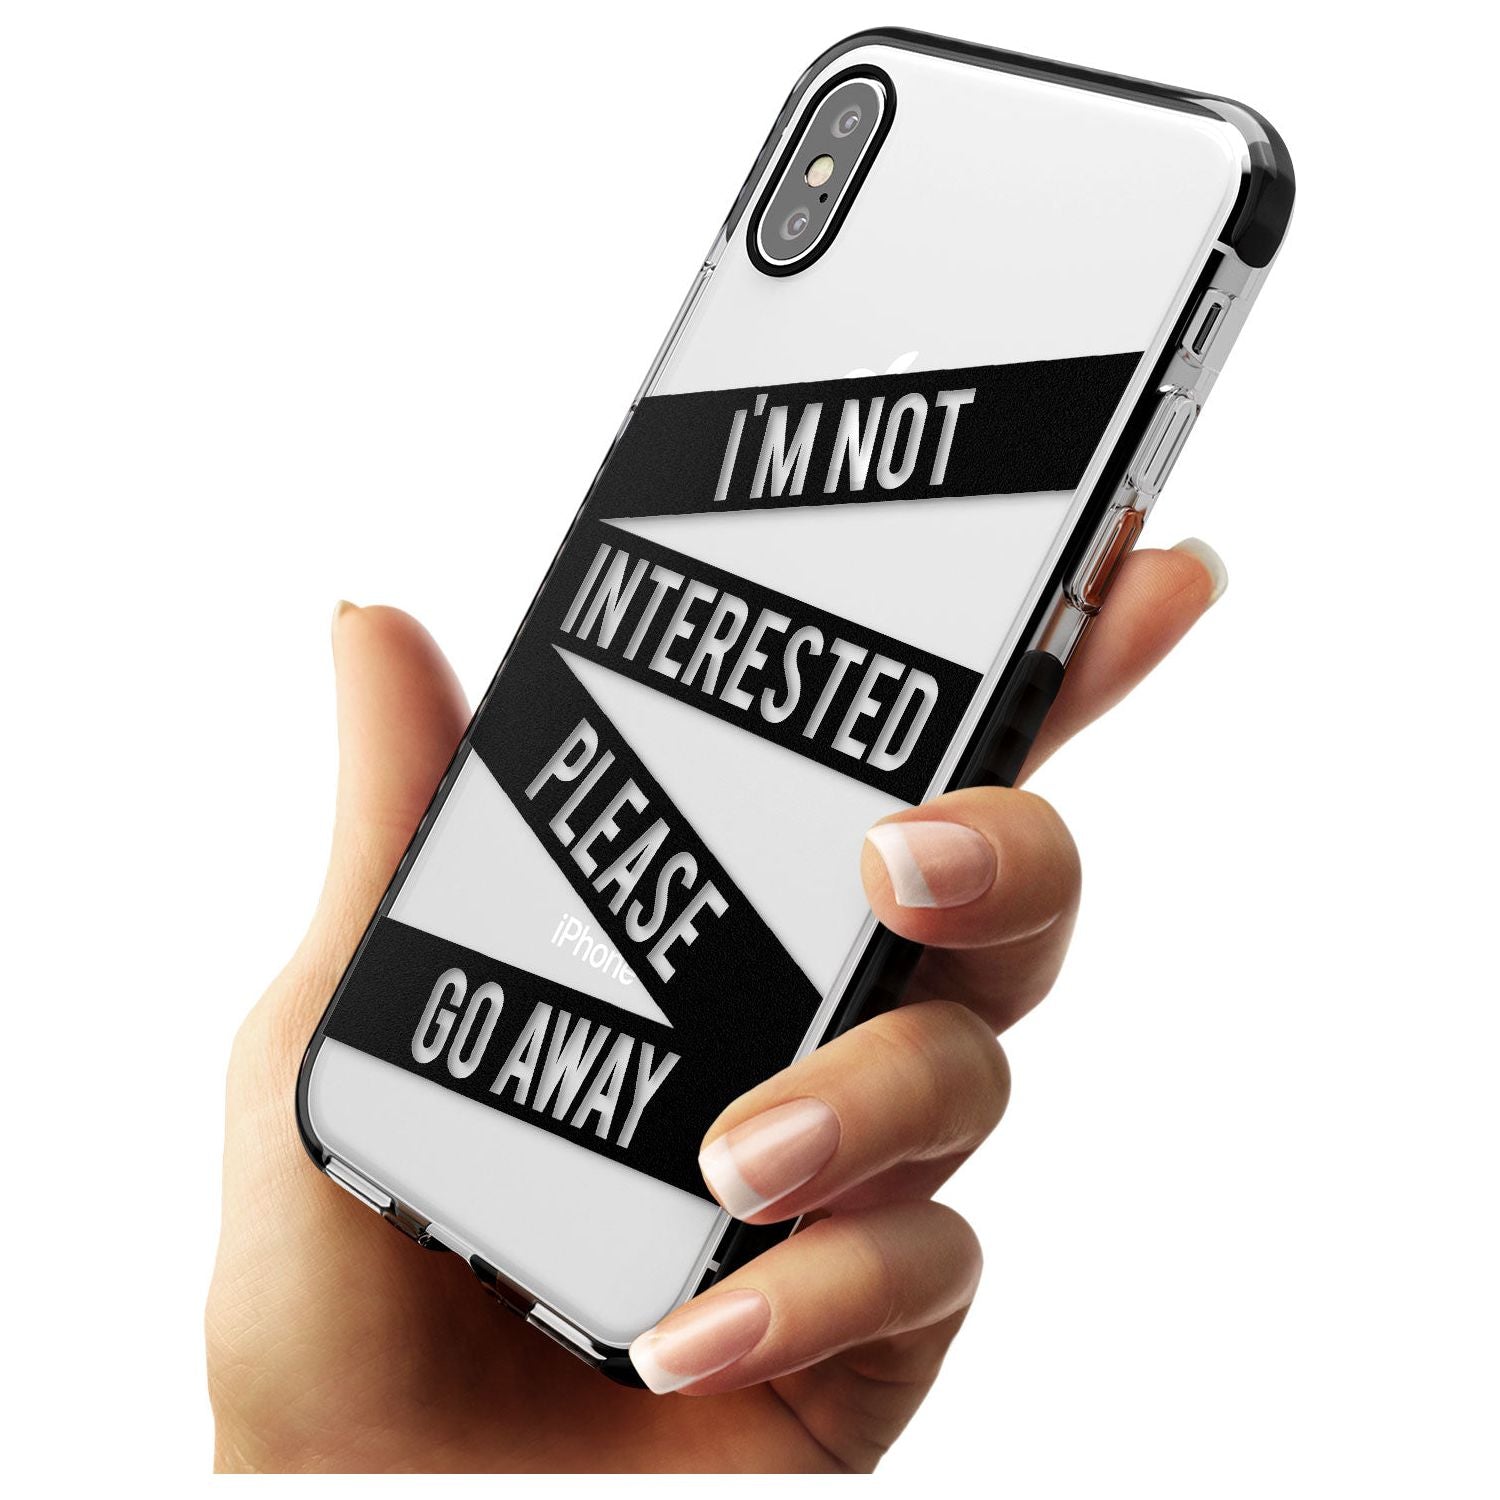 Black Stripes I'm Not Interested Black Impact Phone Case for iPhone X XS Max XR